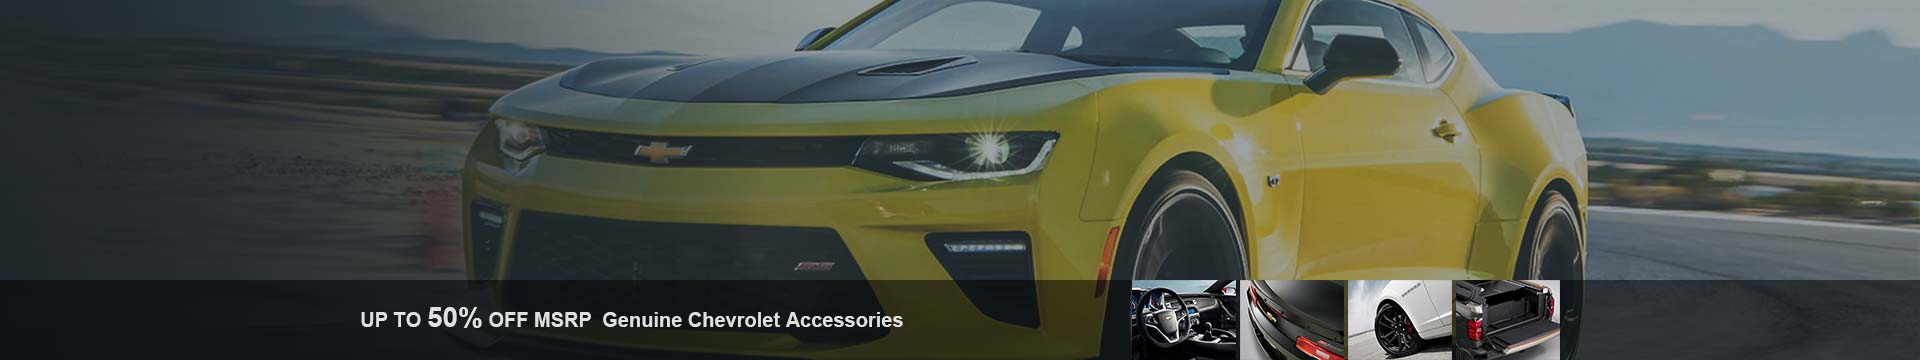 Shop Chevrolet Impala accessories with lowest prices